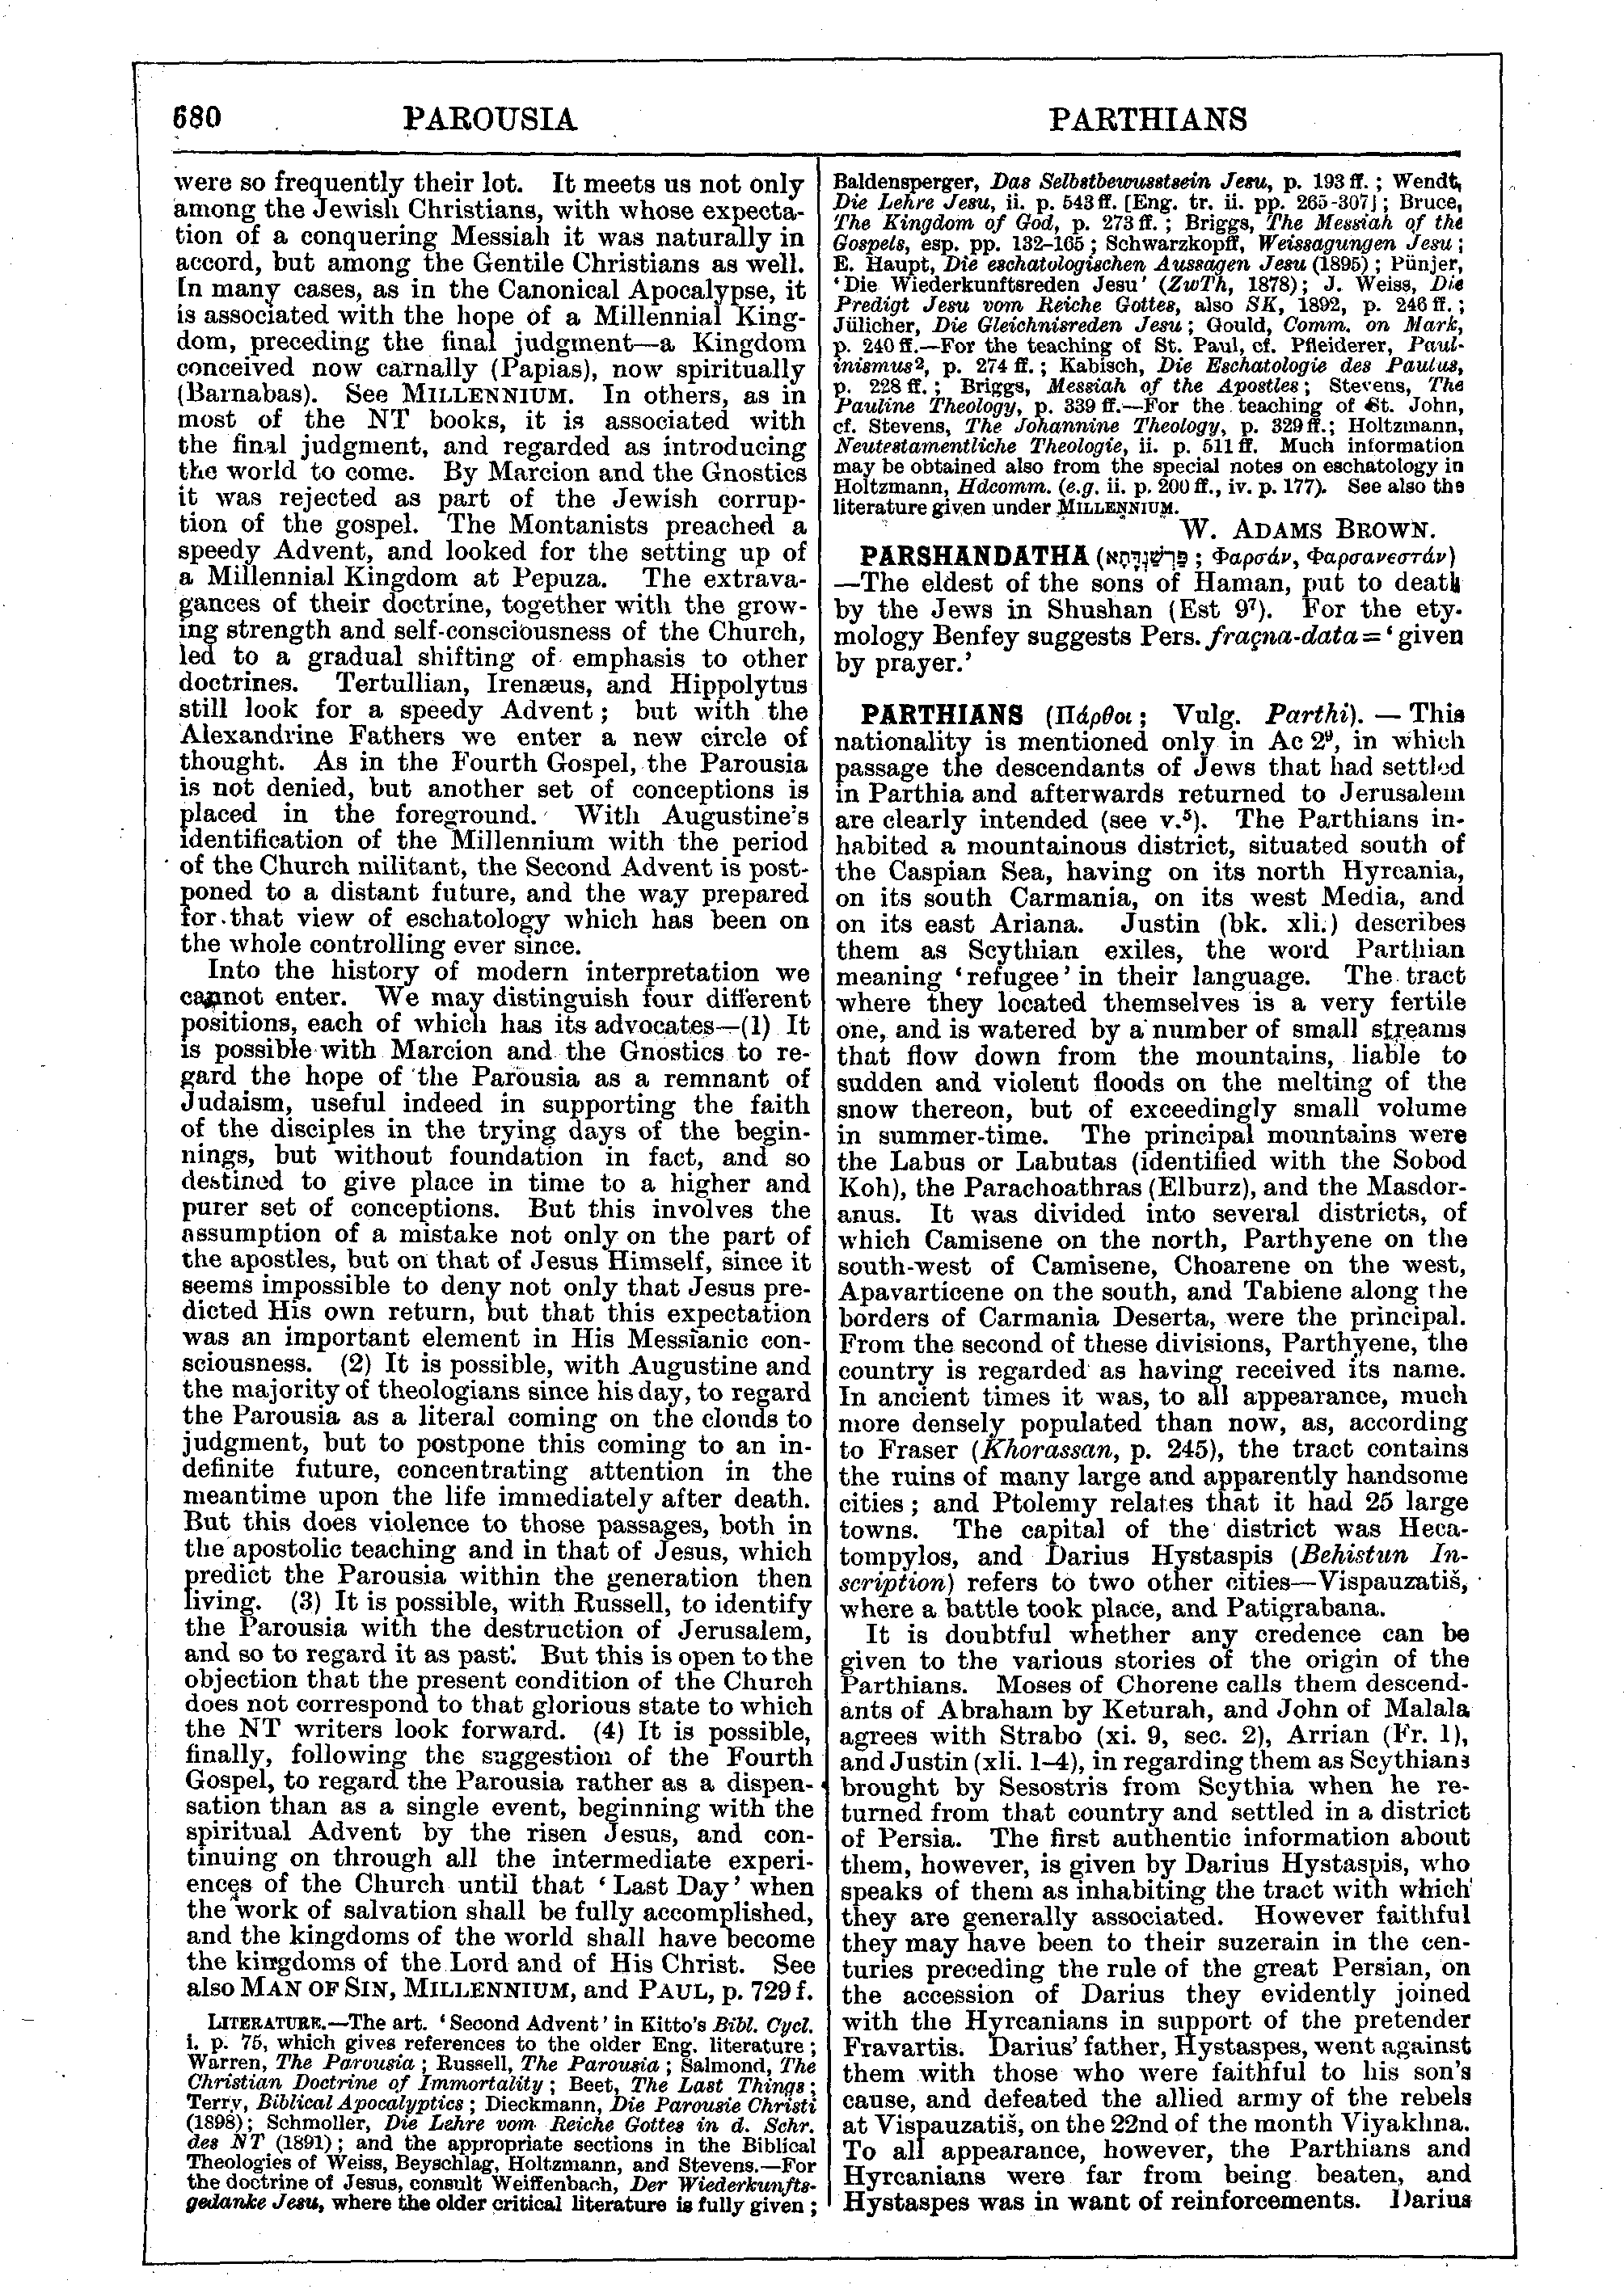 Image of page 680